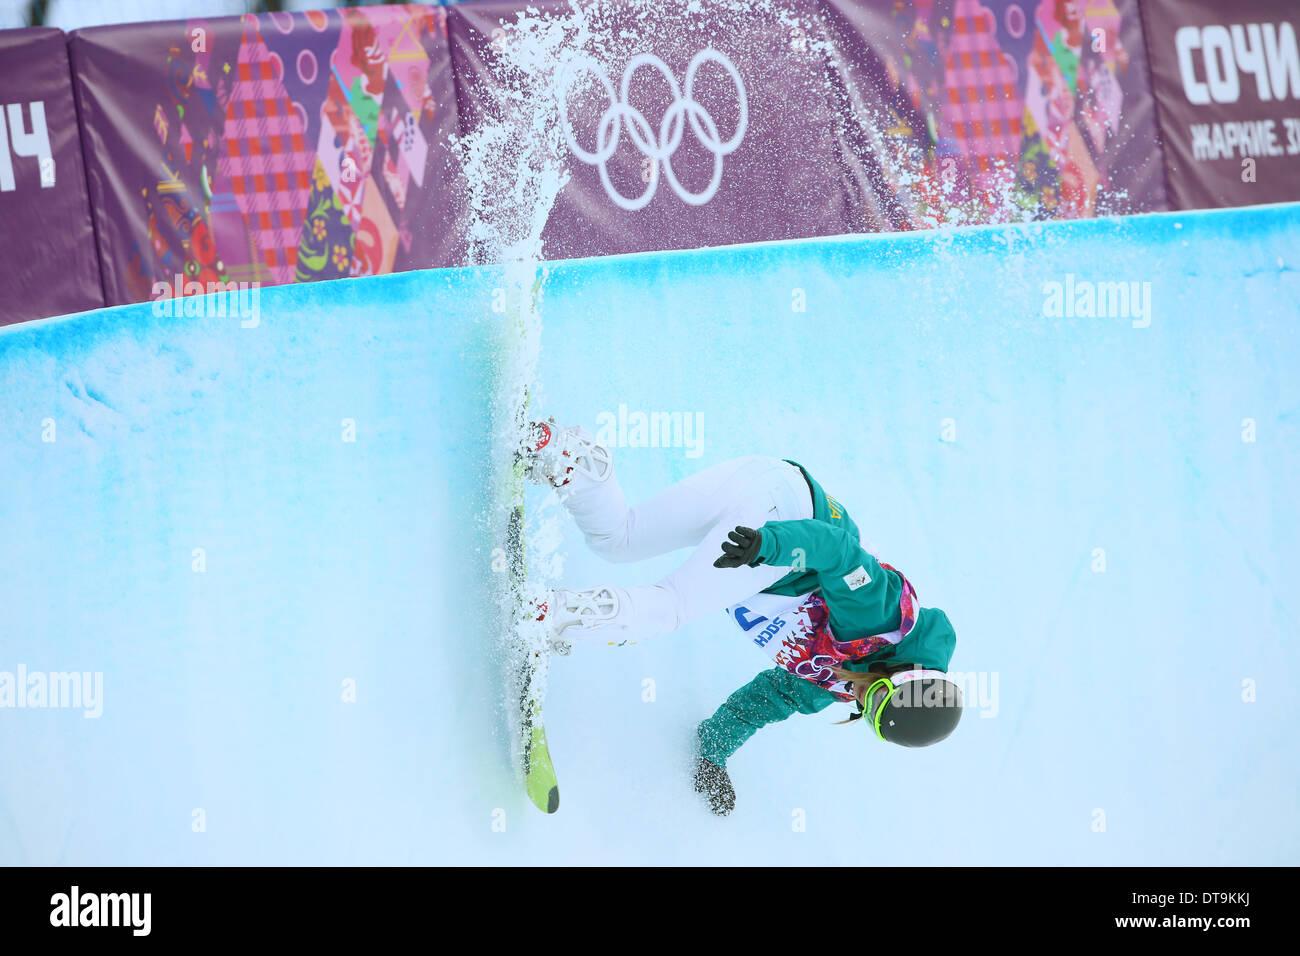 Torah Bright (AUS) competes in the women's halfpipe at the Sochi 2014 Winter Olympic Games. (Photo Yutaka/AFLO) Stock Photo